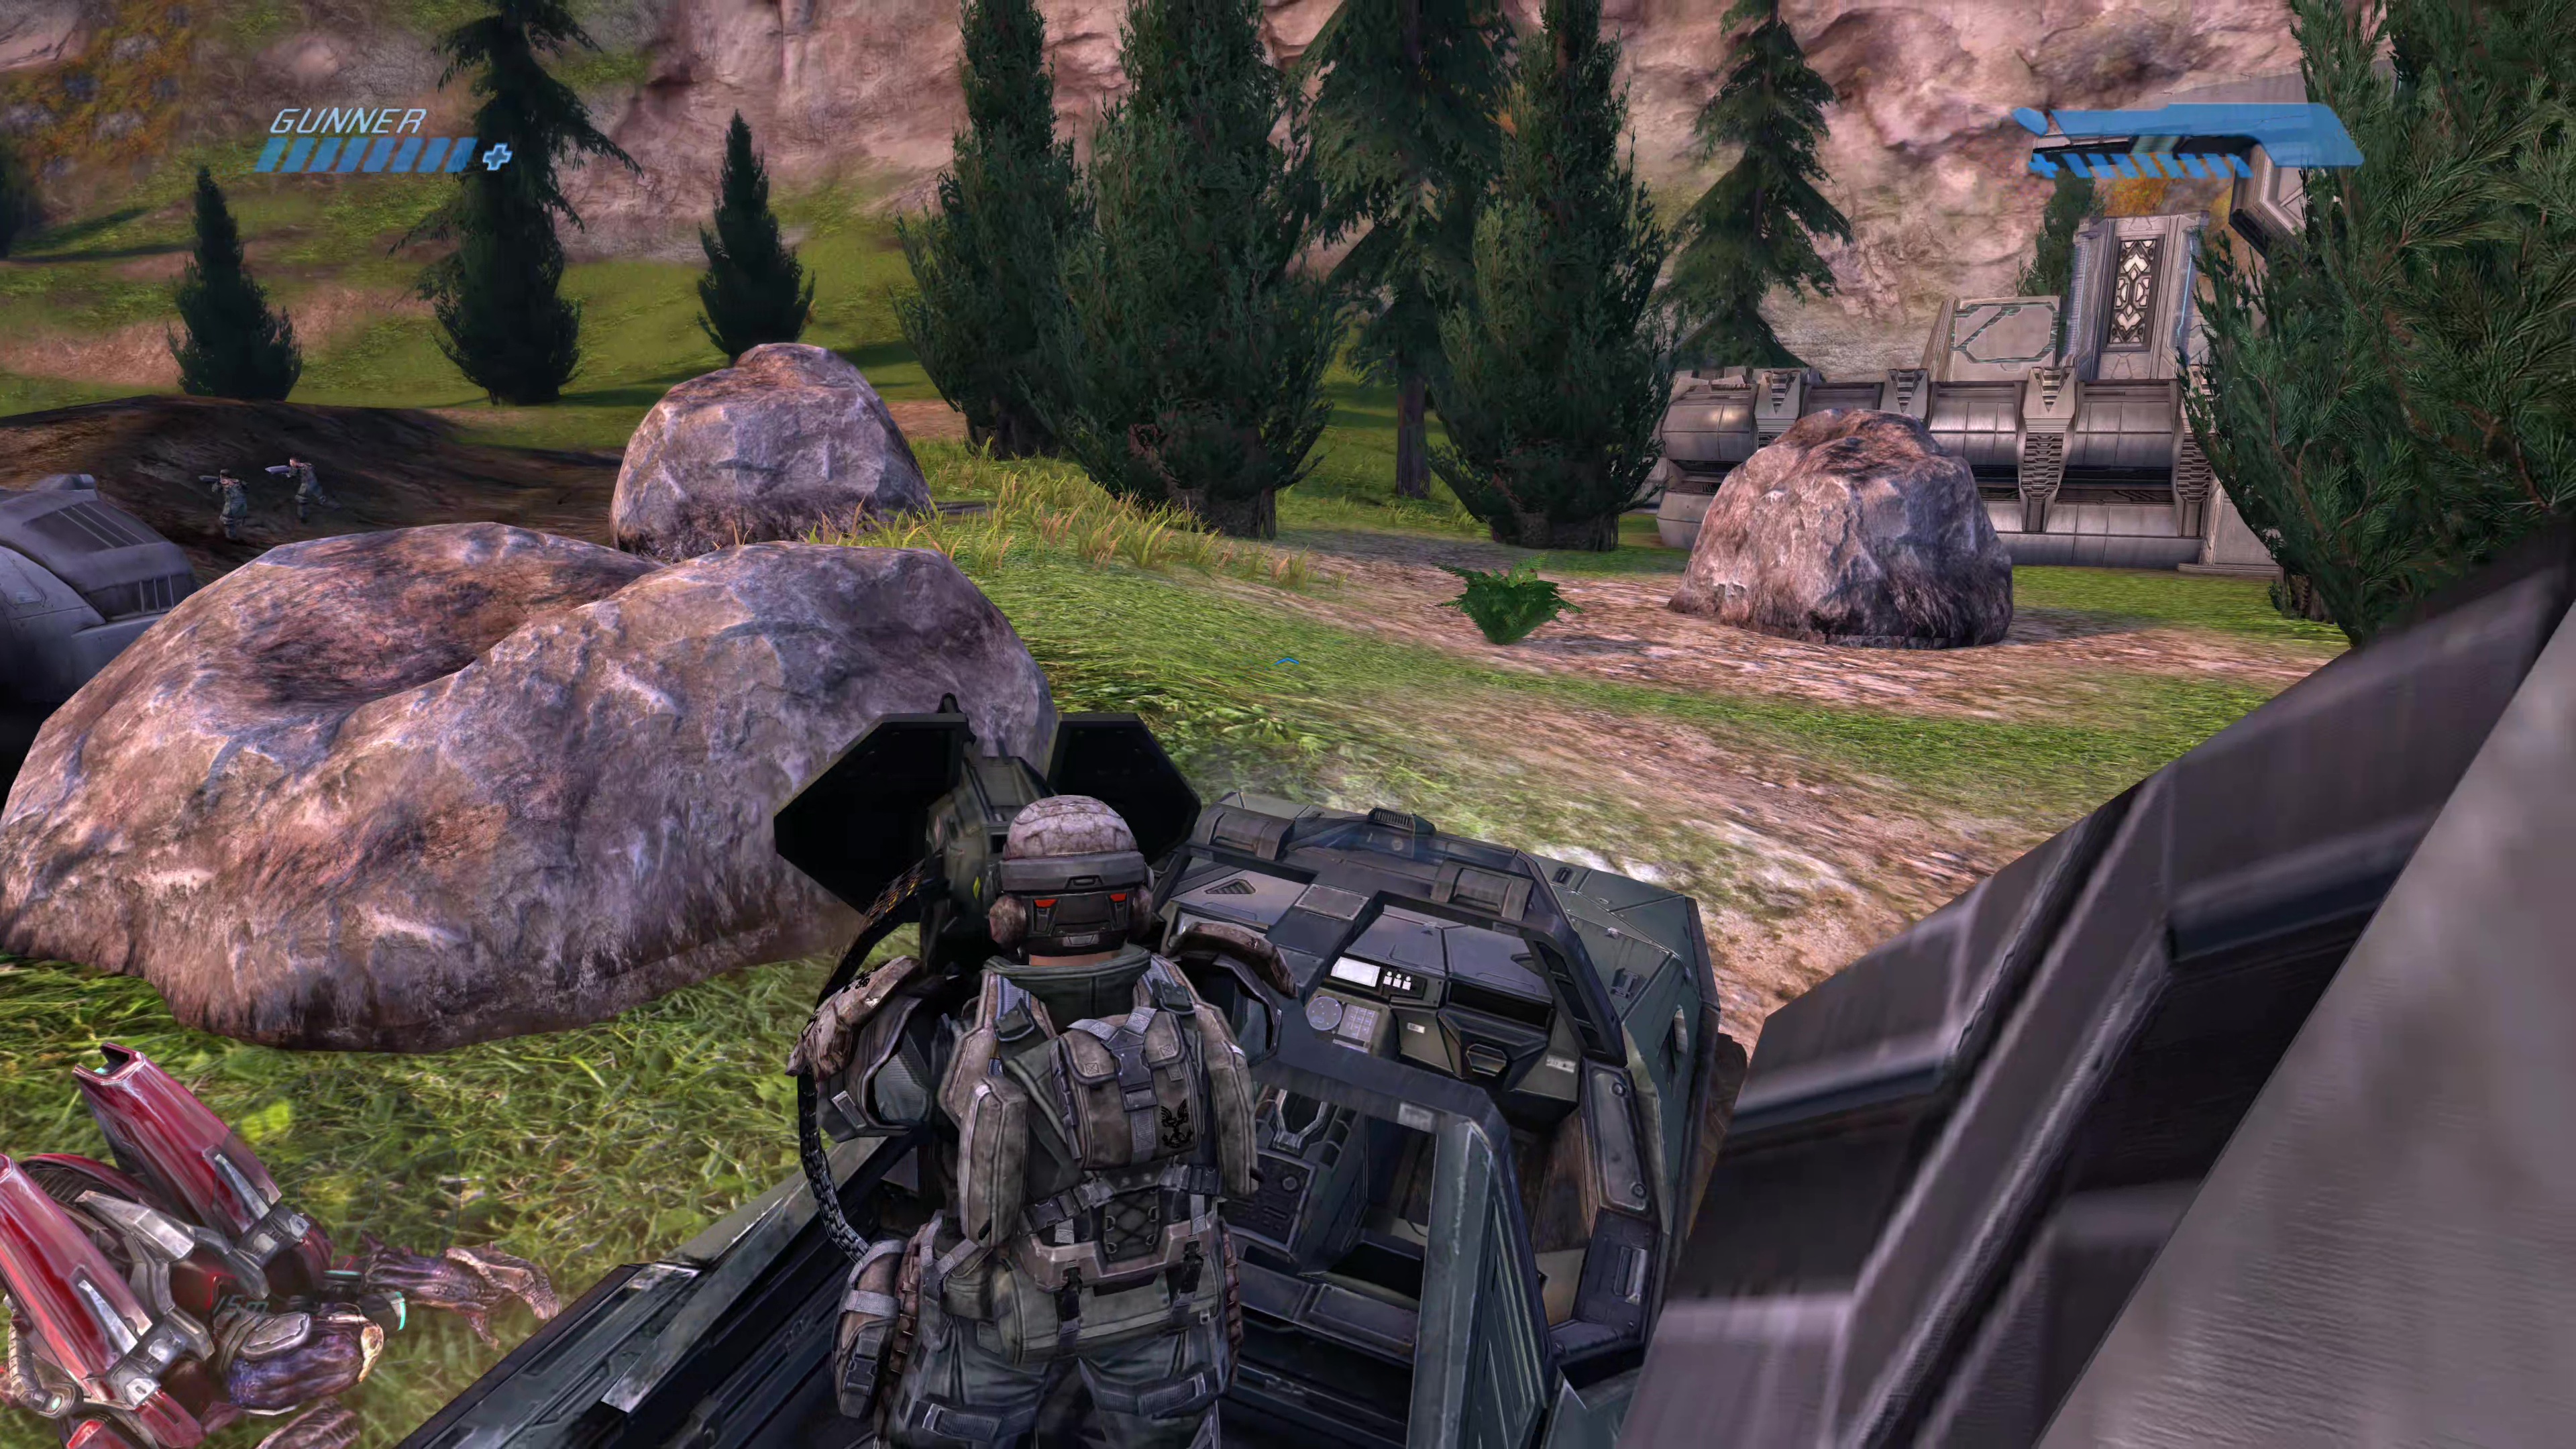 Halo: The Master Chief Collection screenshot 22313